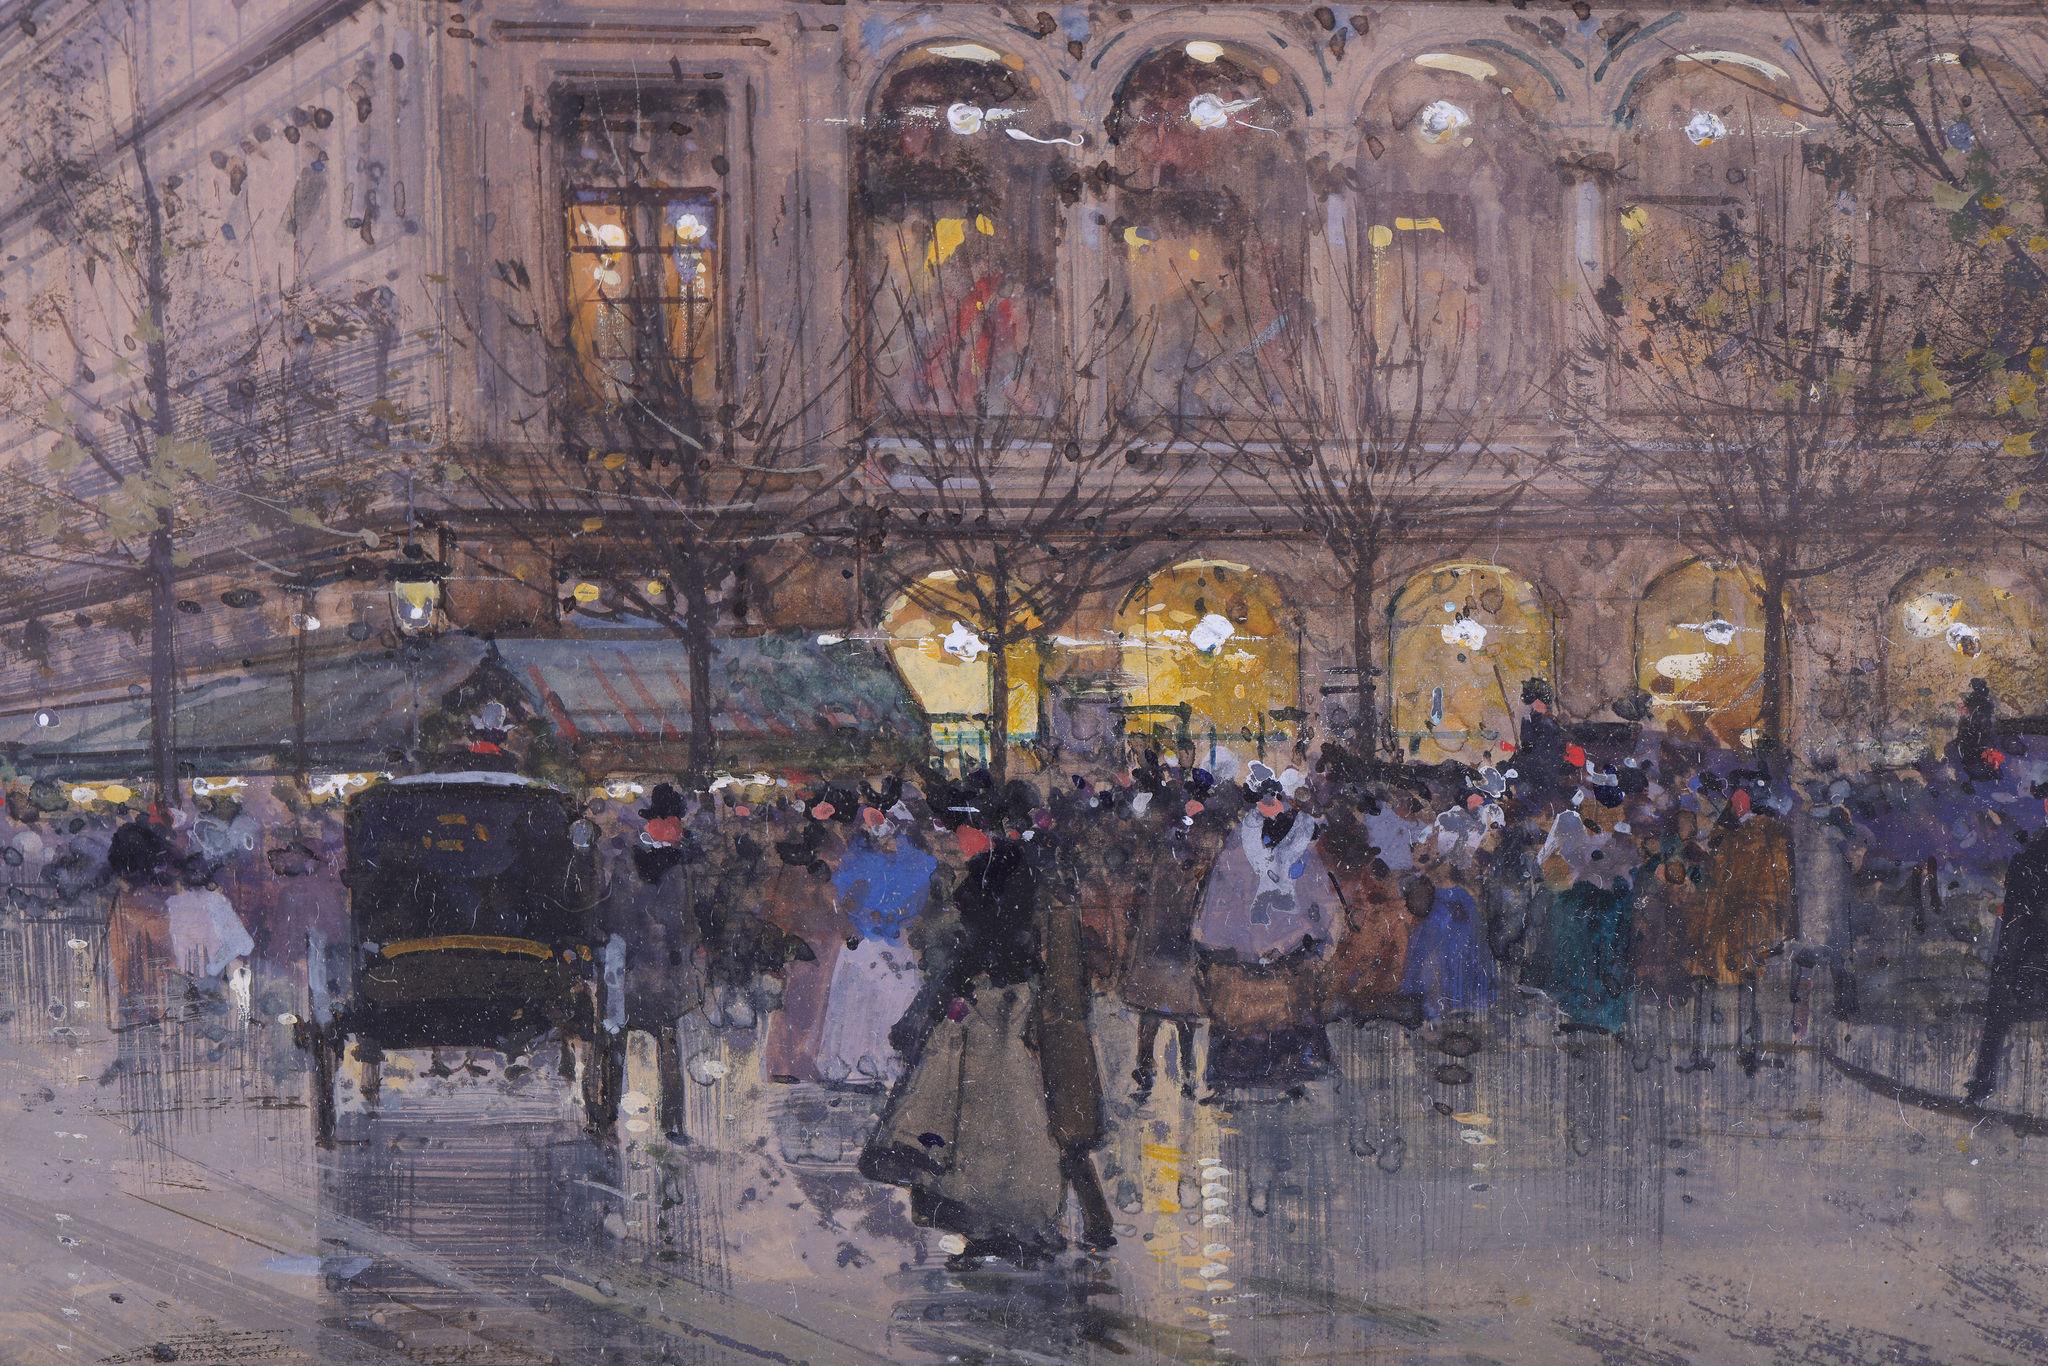 Theatre Du Chatelet
A stunning gouache by one of France's premier artists specialising in Parisian scenes.

Eugene Galien LALOUE
(1854 - 1941) 
 Eugène Galien Laloue was particularly adept at establishing several identities, since over the course of